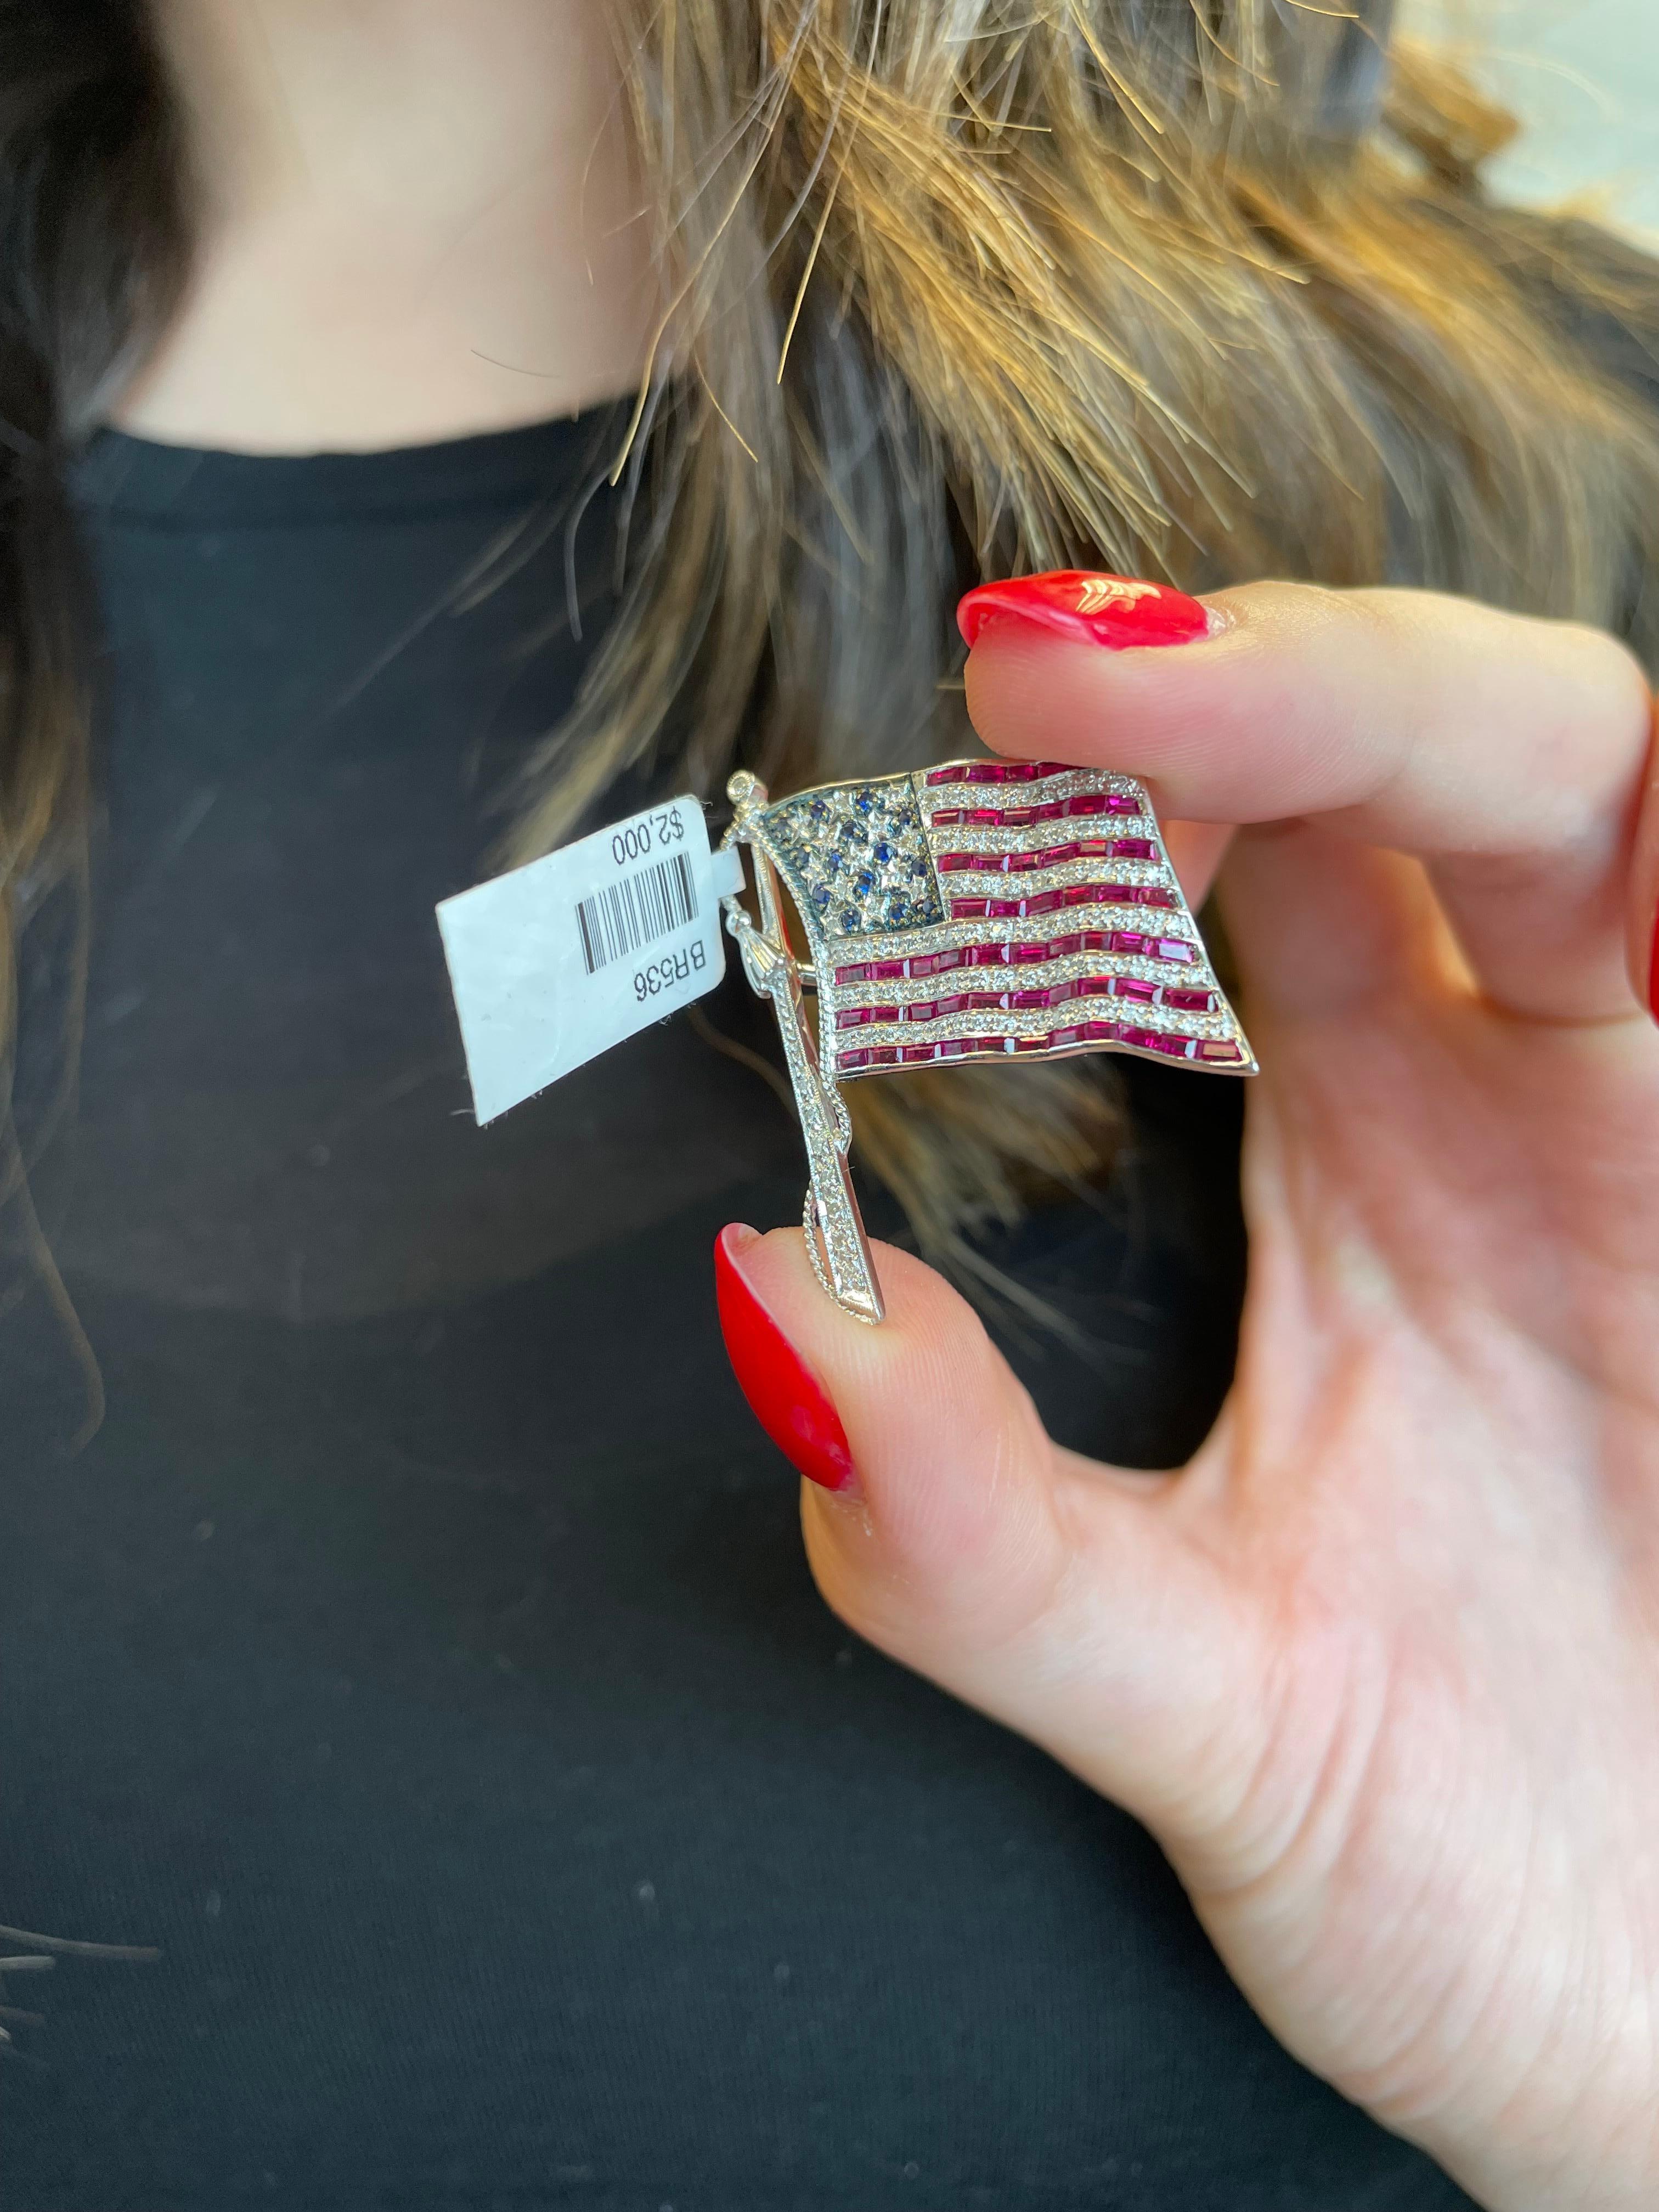 Stunning American flag brooch.
Approximately 1.50 carats of ruby, diamonds, and sapphires. 18-karat white gold with some black rhodium.
Accommodated with an up to date appraisal by a GIA G.G., please contact us with any questions. Thank you.

Item